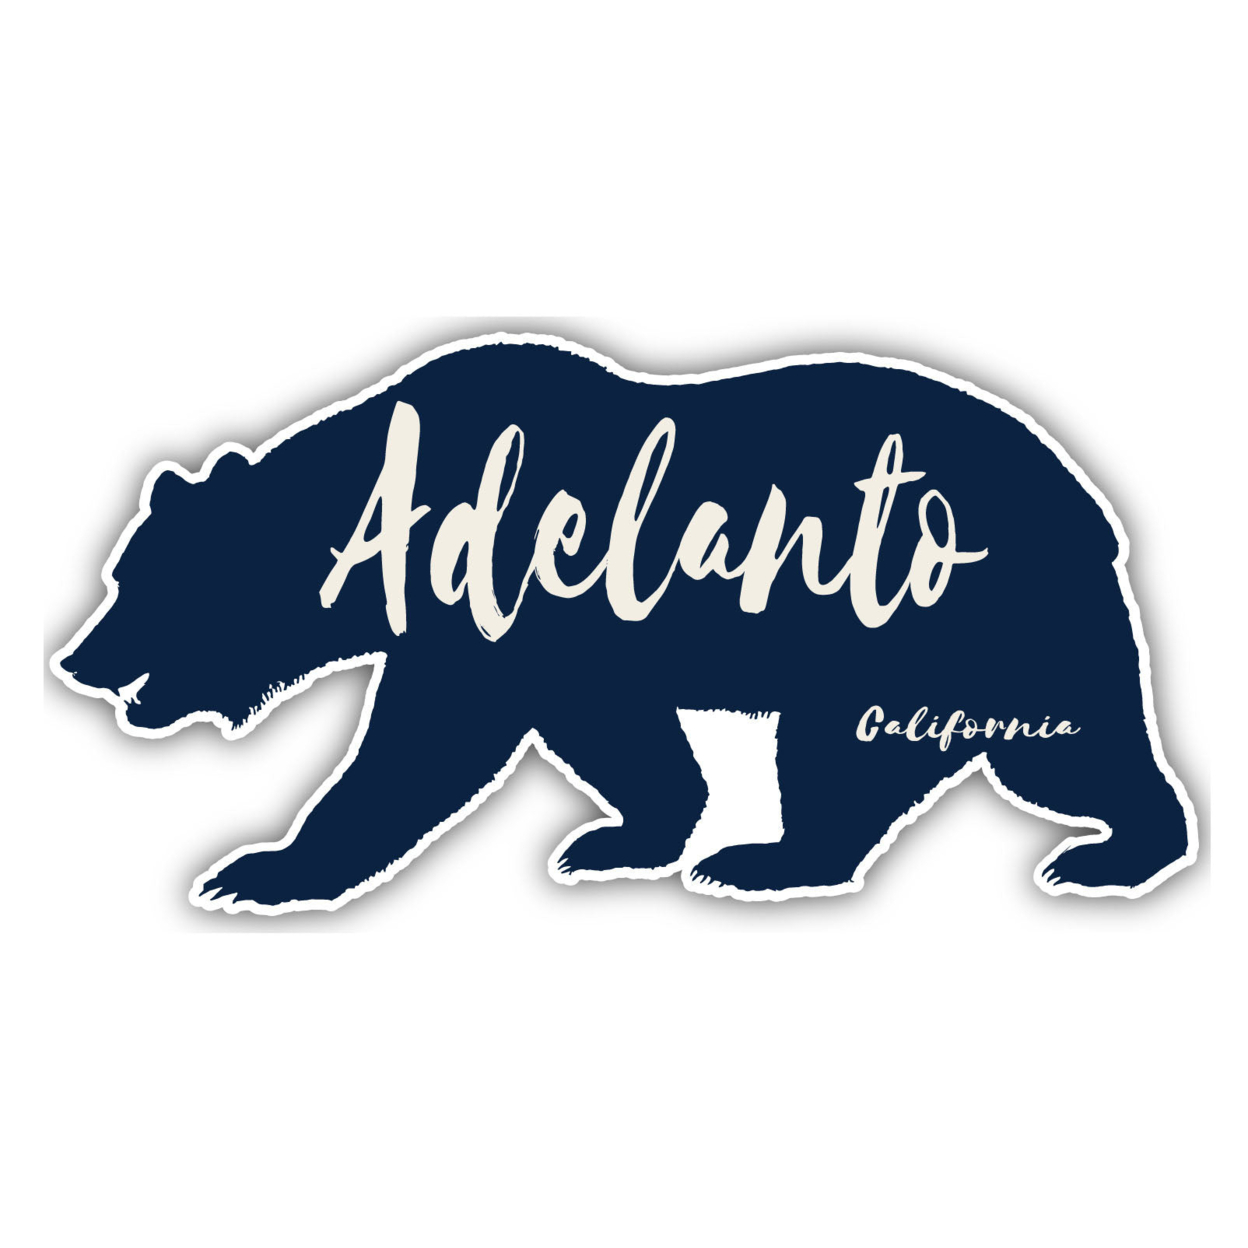 Adelanto California Souvenir Decorative Stickers (Choose Theme And Size) - 4-Pack, 12-Inch, Bear